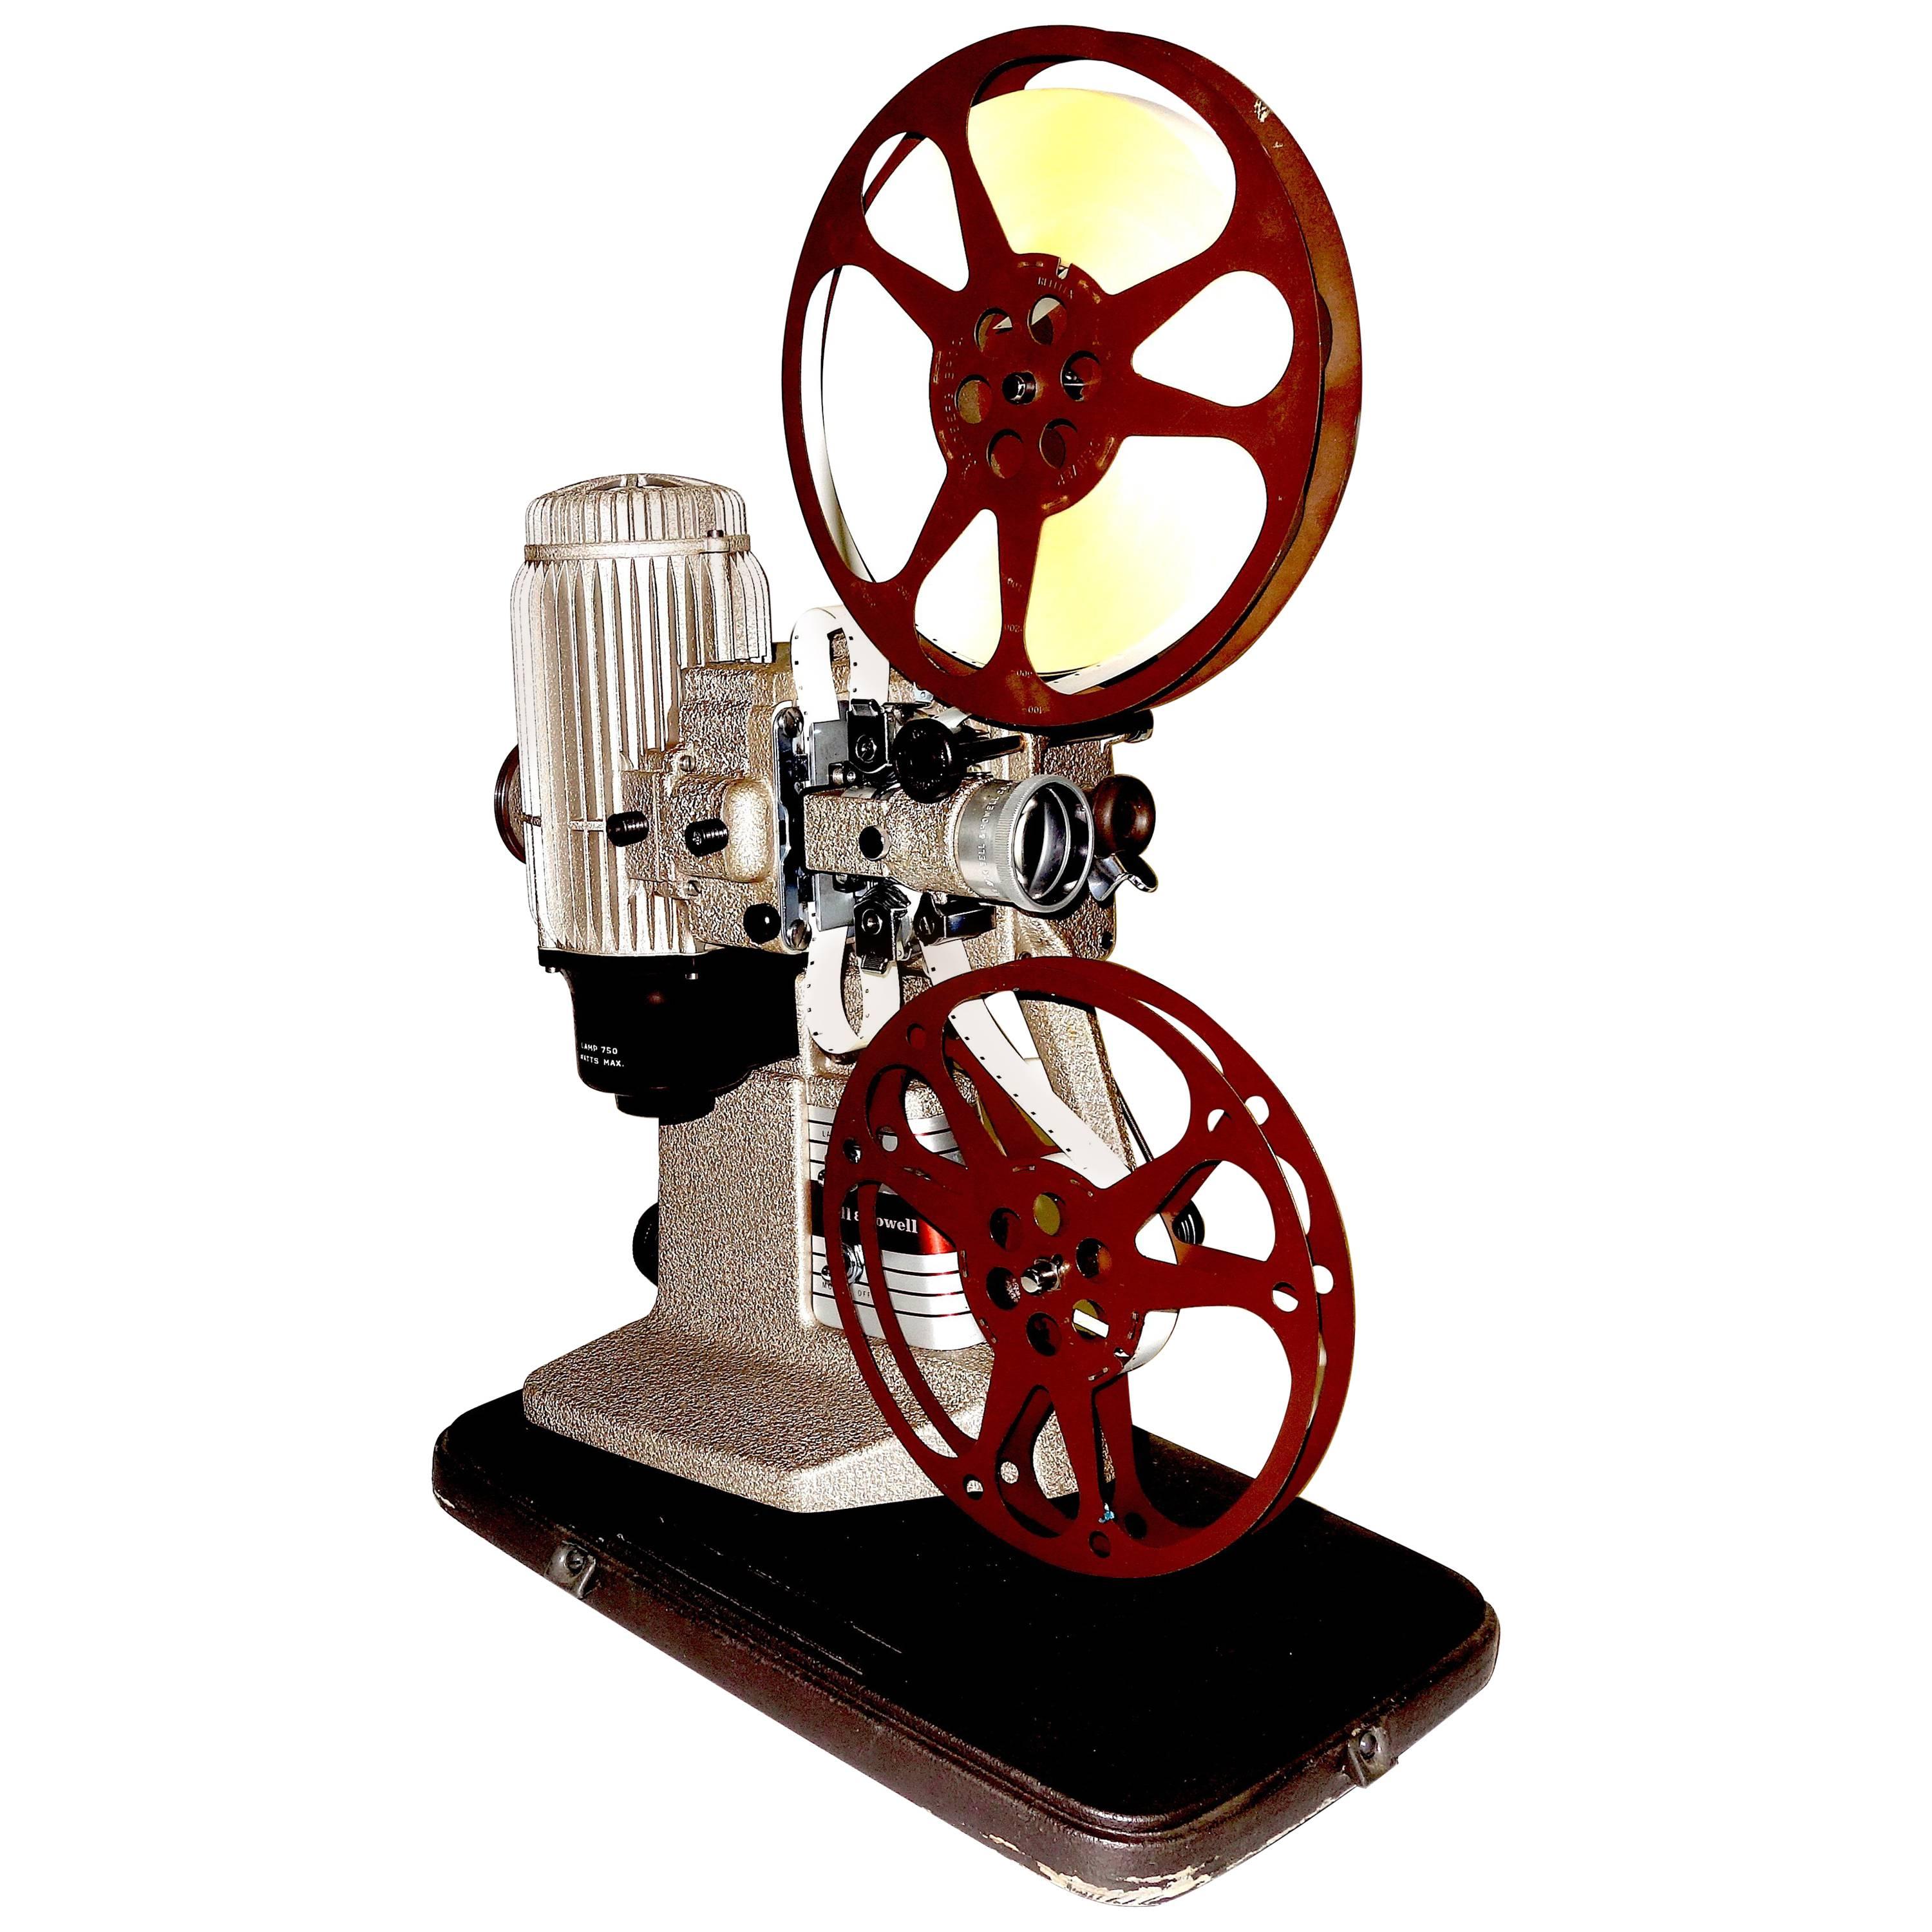 16mm Movie Projector, circa 1940, Rare Sculpture for Media Room For Sale